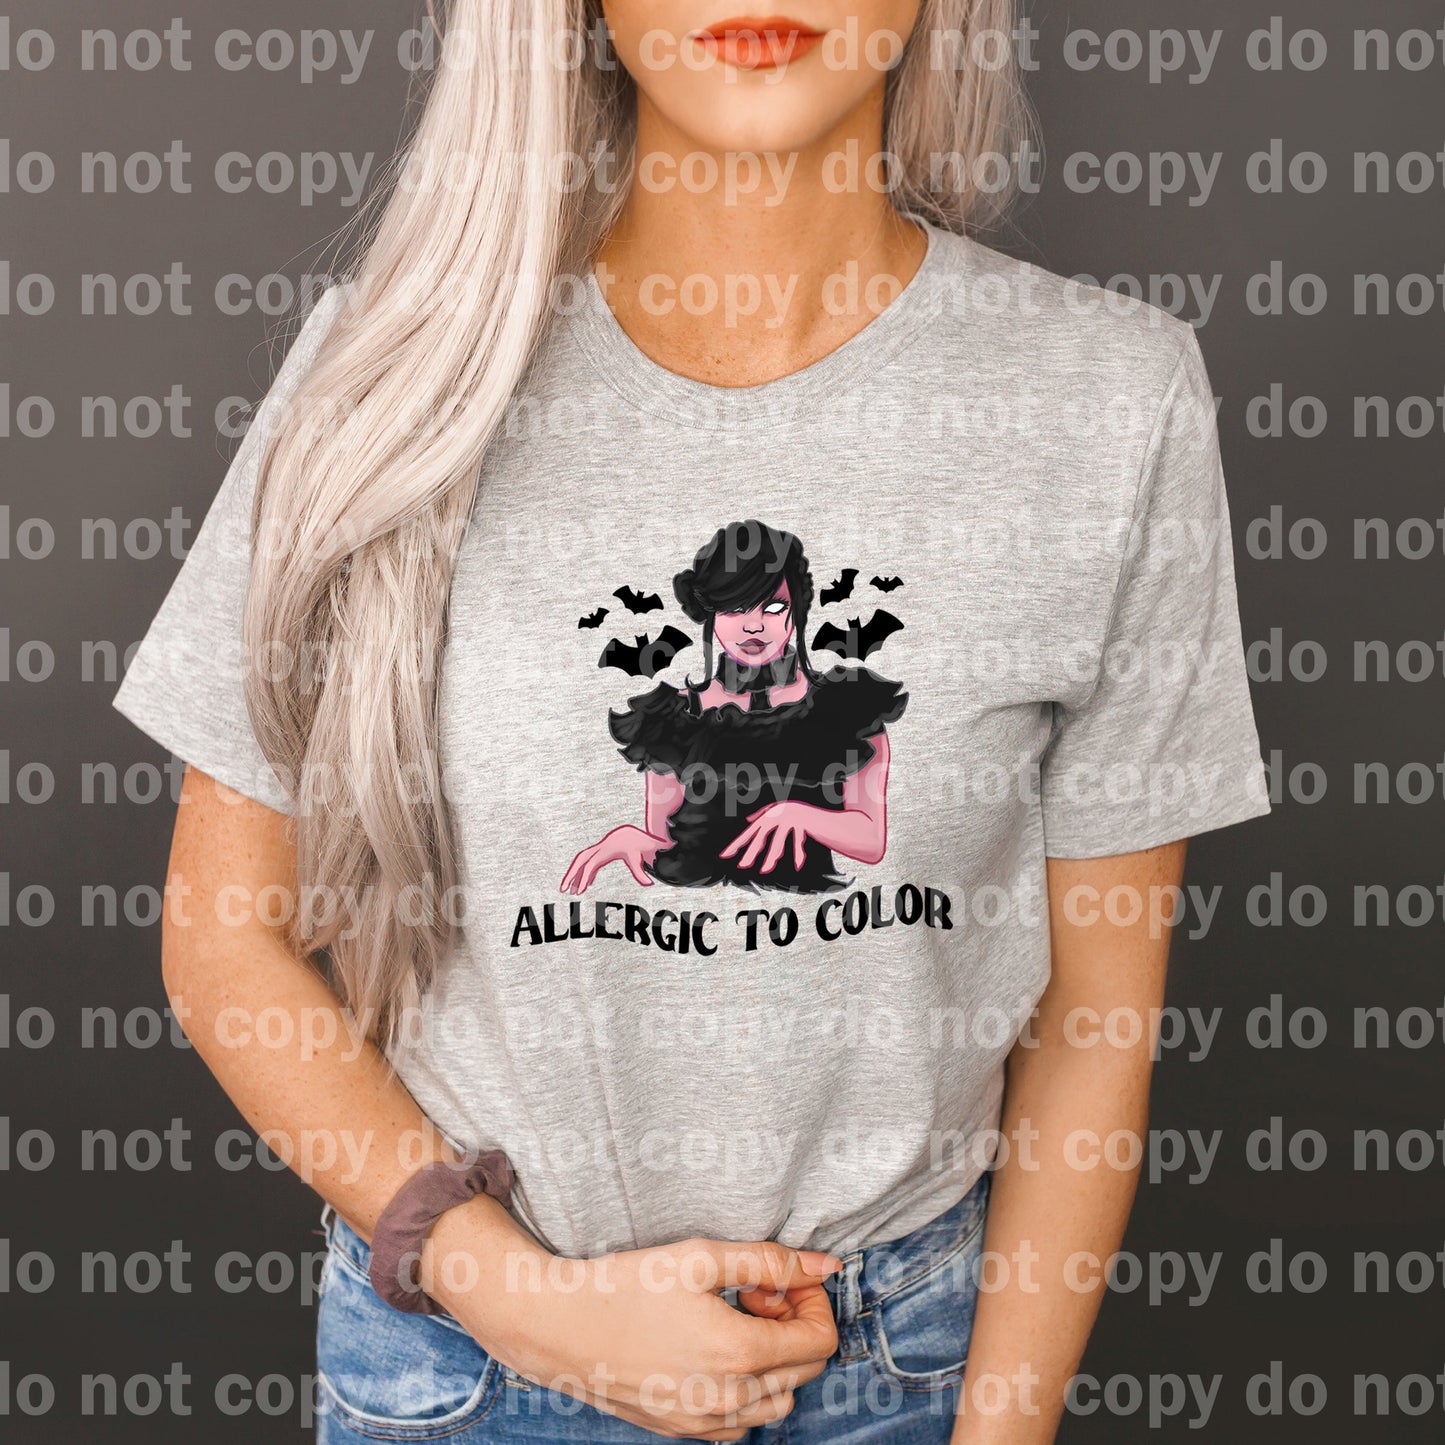 Allergic To Color Colored/Pale Dream Print or Sublimation Print